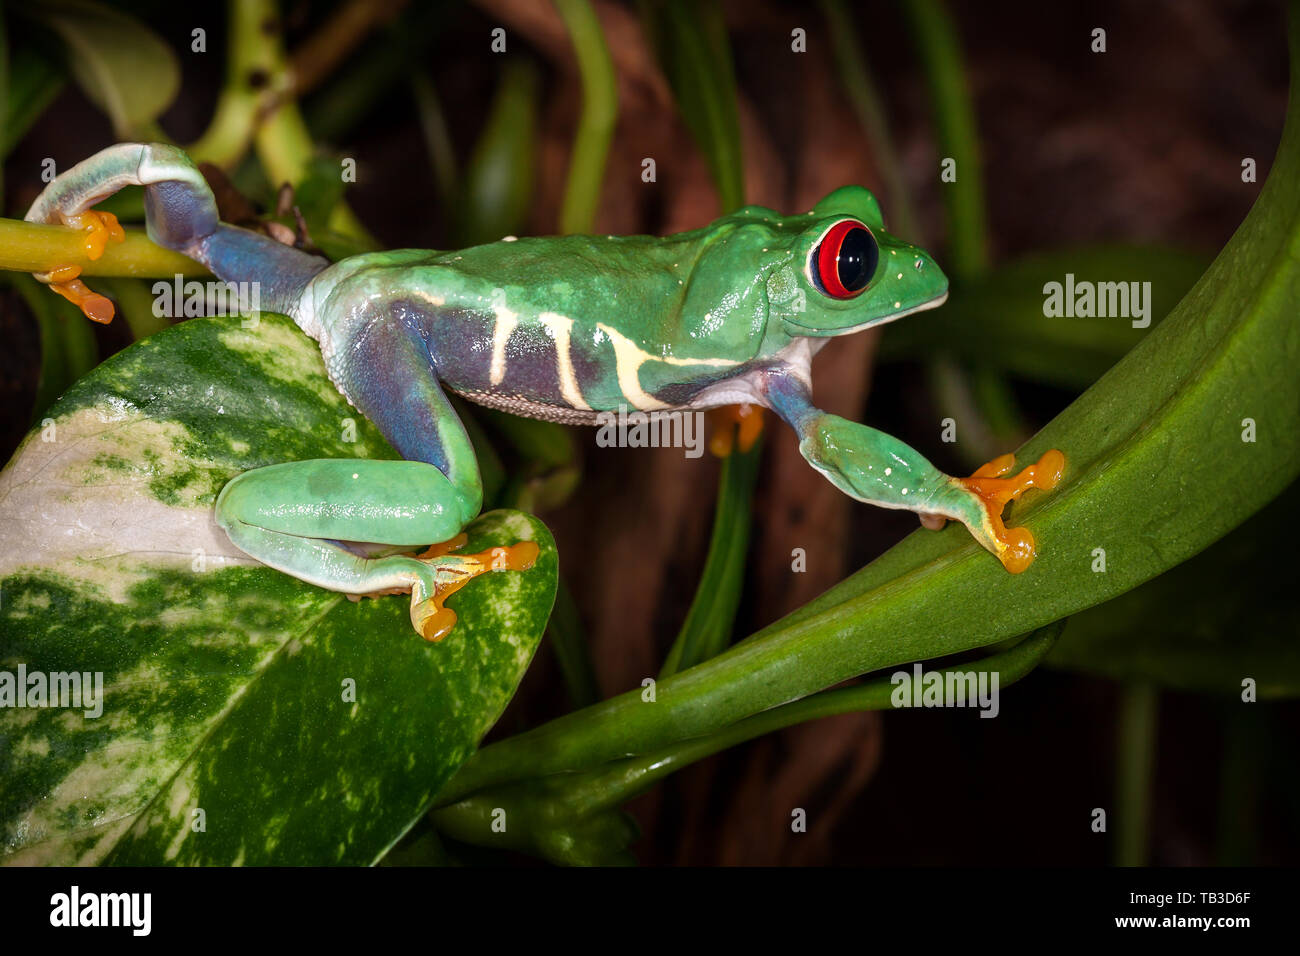 The red eyed tree frog travels on plant leaves Stock Photo